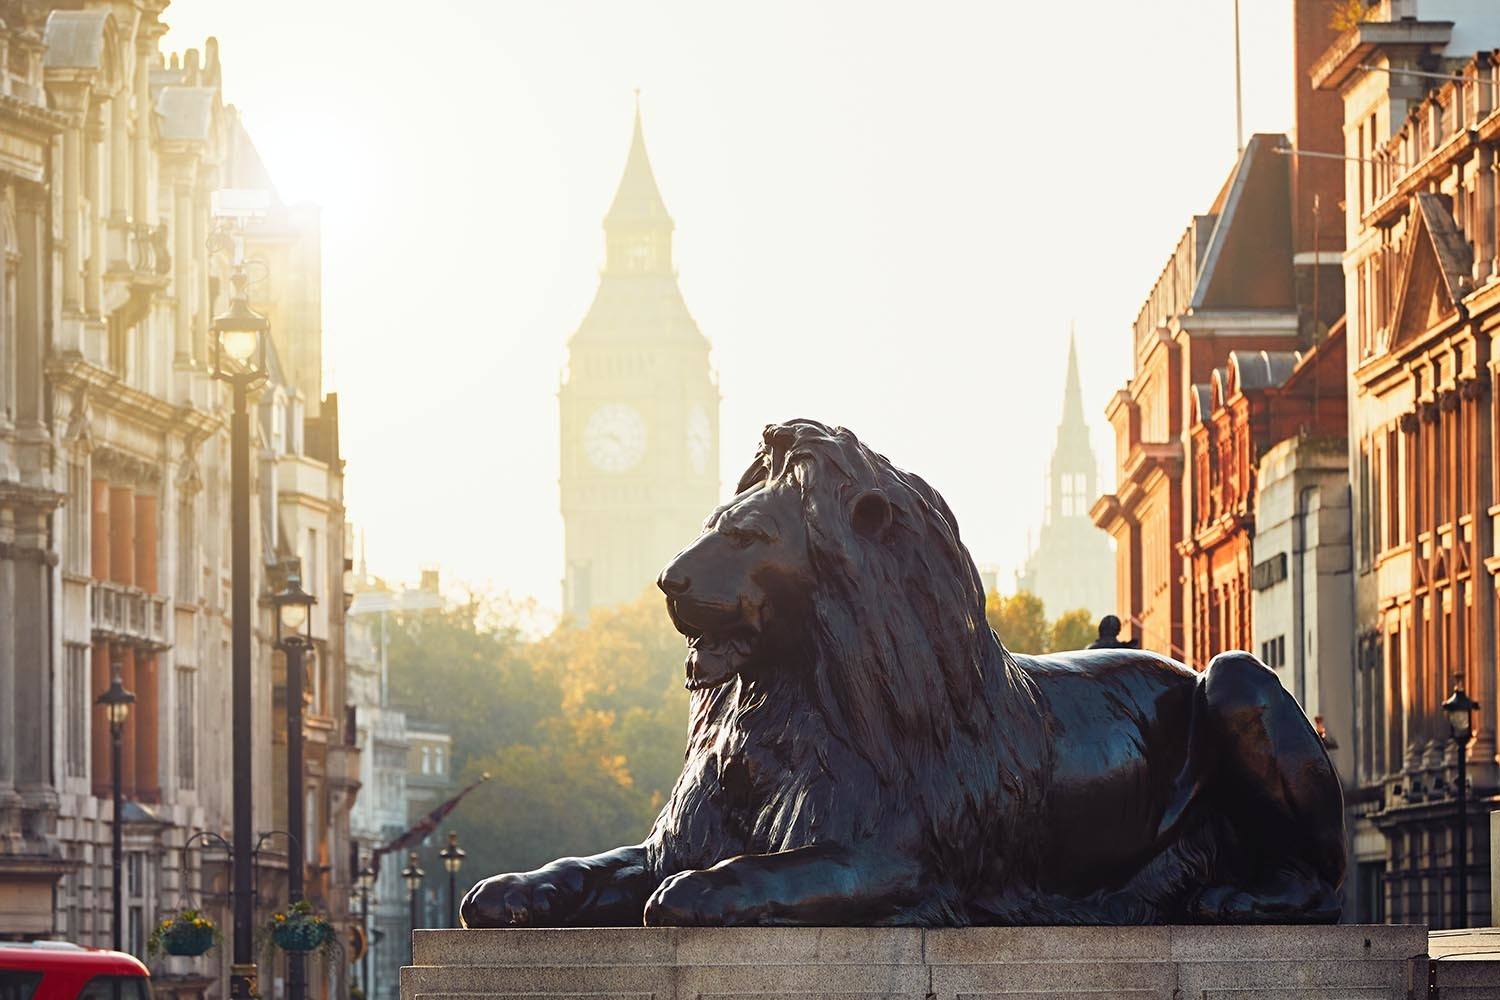 55 Interesting Facts about London I’ll Bet You Never Knew